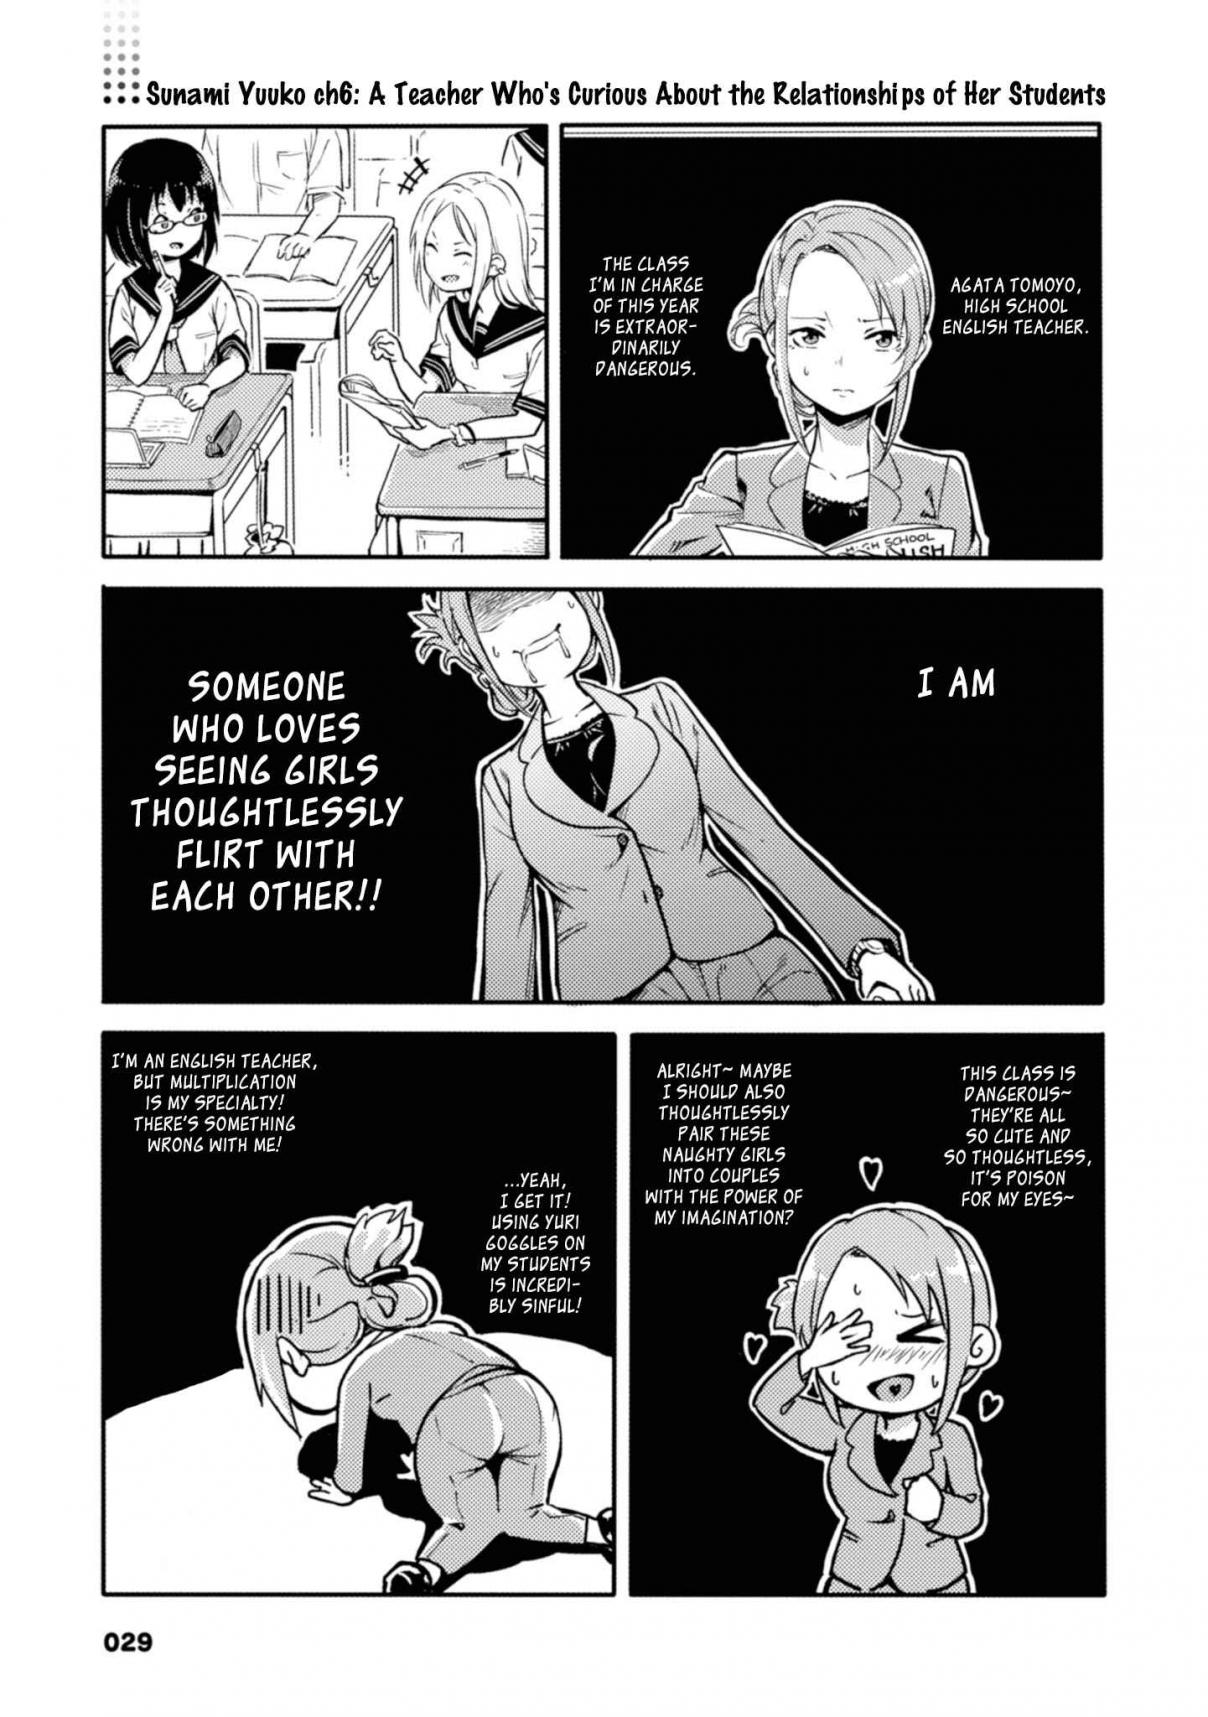 Sunami Yuuko to Yuri na Hitobito Vol. 1 Ch. 6 A Teacher Who's Curious About the Relationships of Her Students